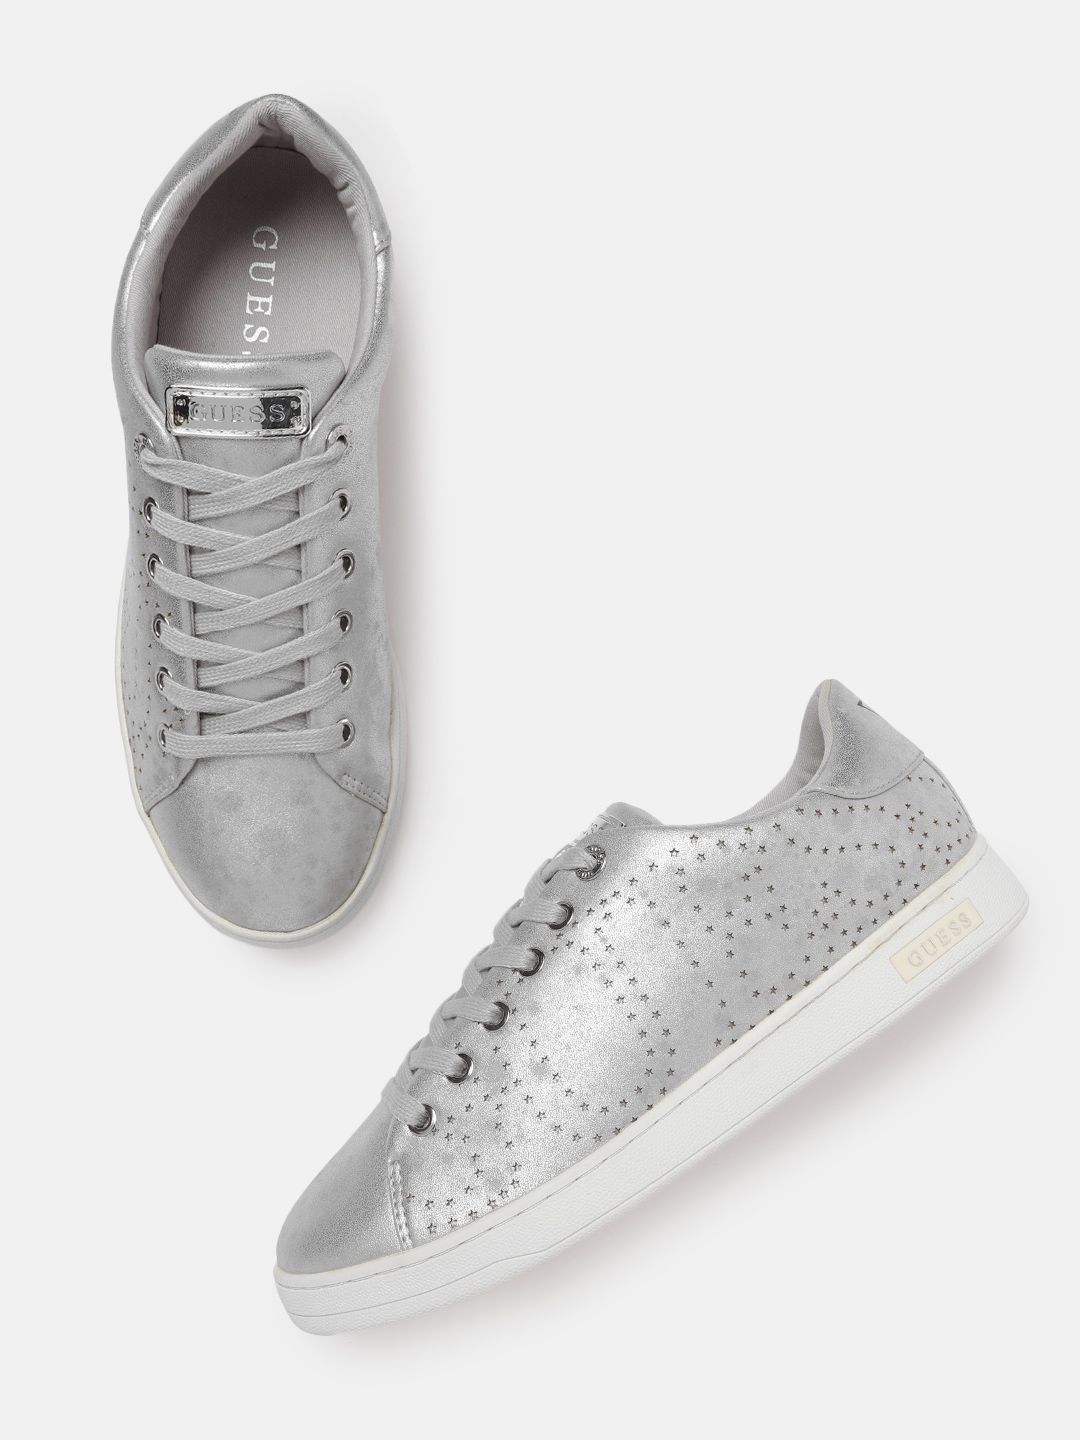 GUESS Women Silver-Toned Perforated Sneakers Price in India